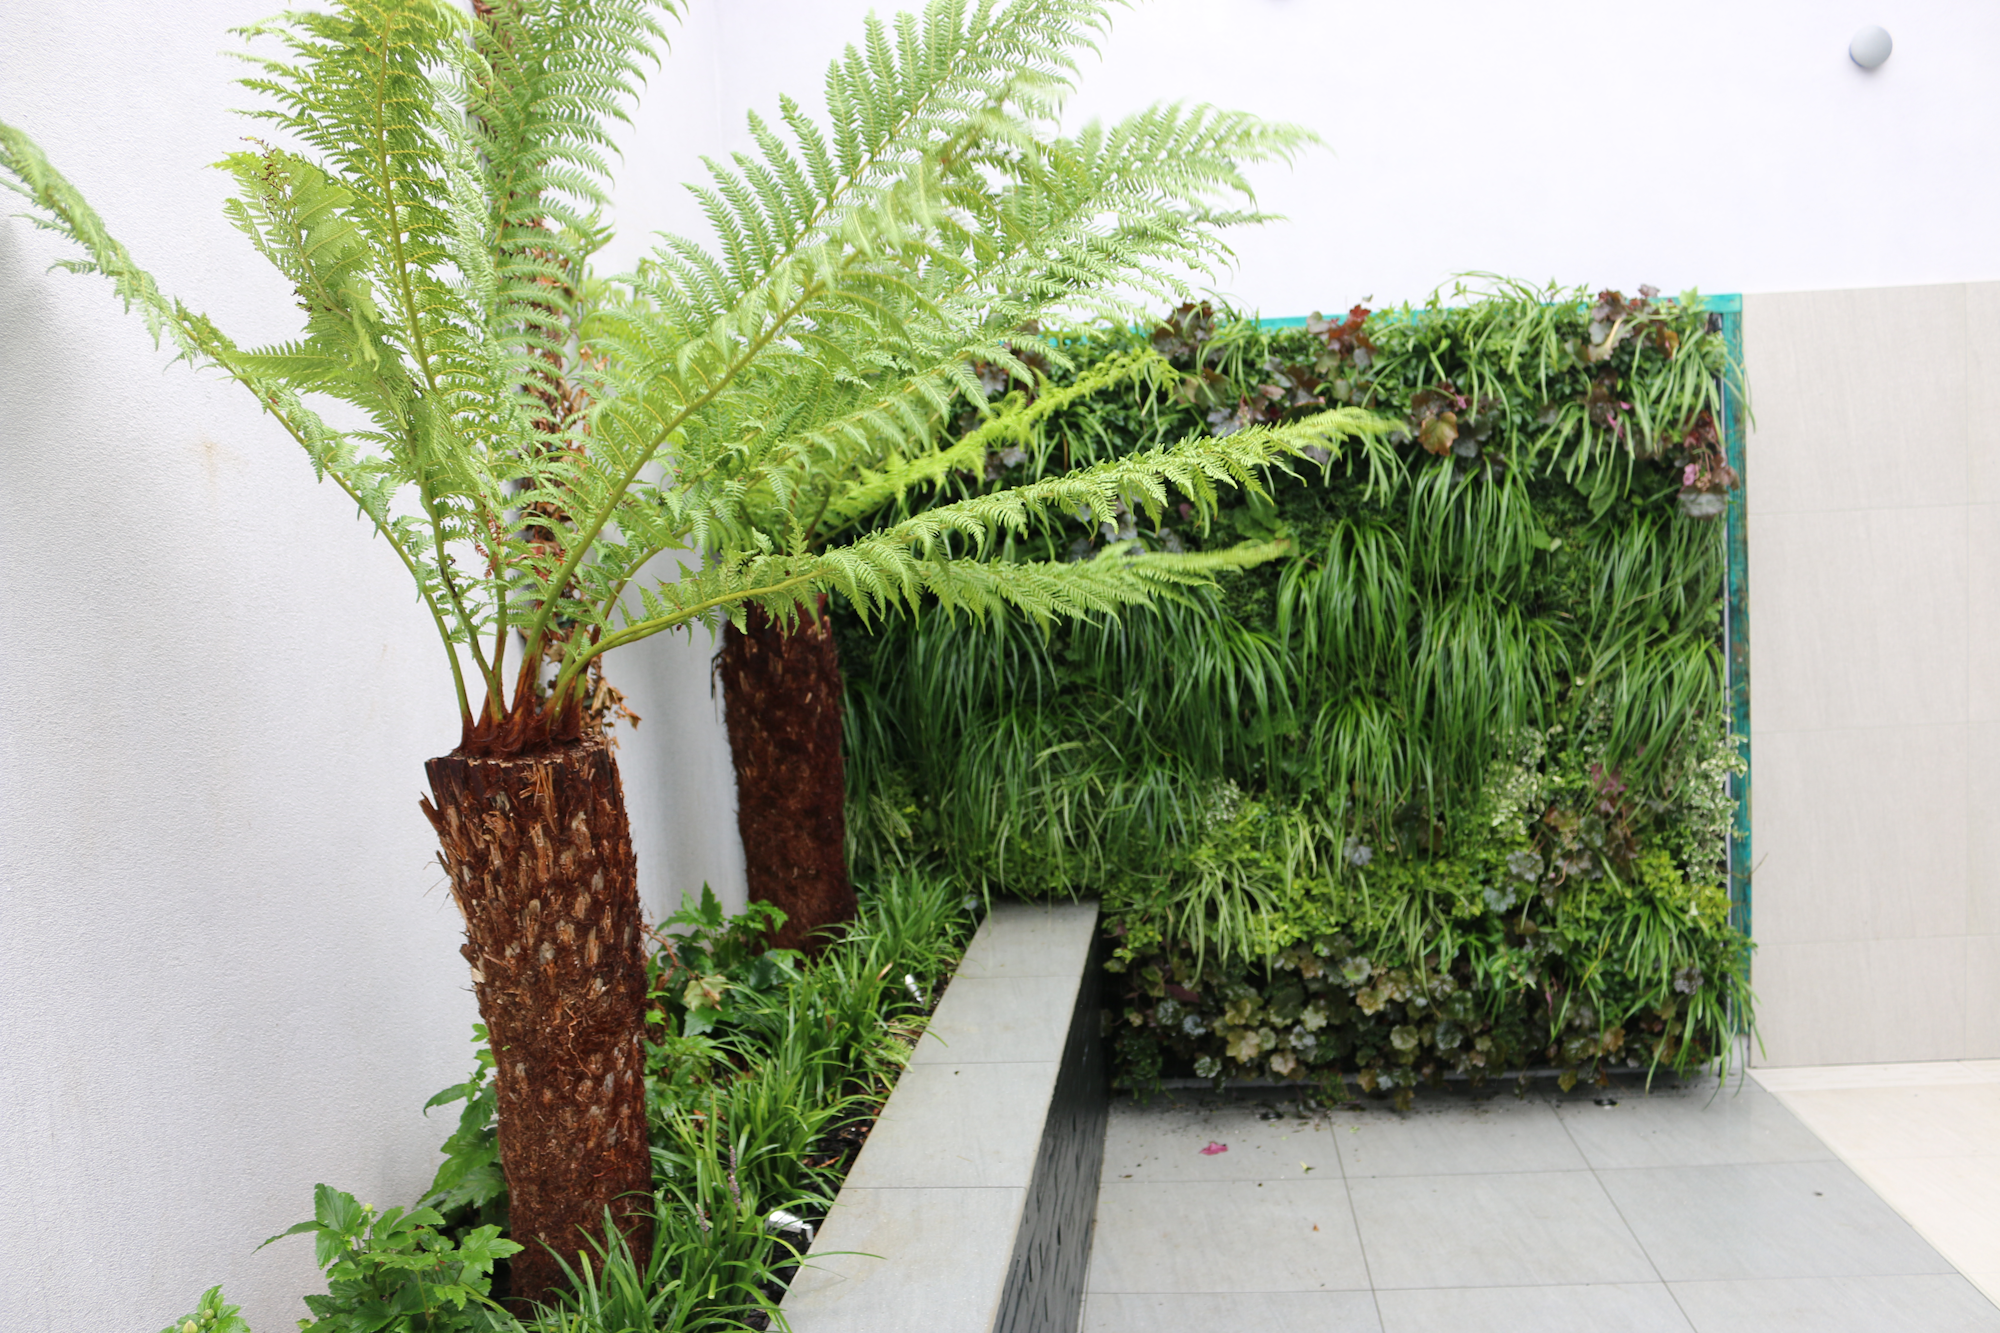 Tree Ferns and The Living Wall In The Patio Space At A Home In Jersey